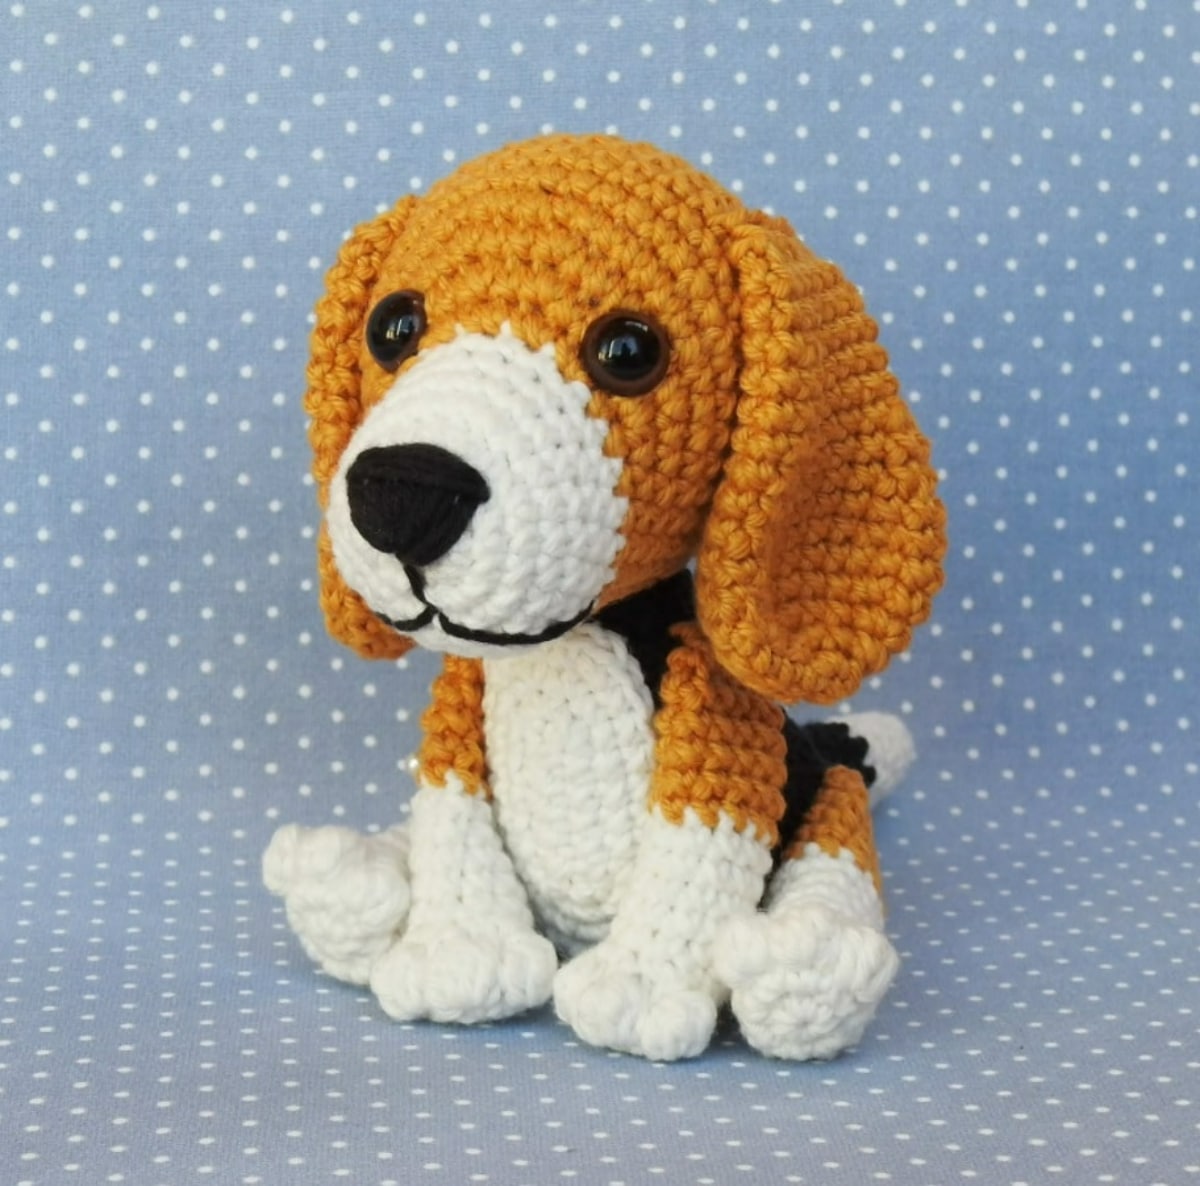 A crochet stuffed Beagle with a brown face and ears and white body, nose, and legs sitting on a blue and white spotty background.